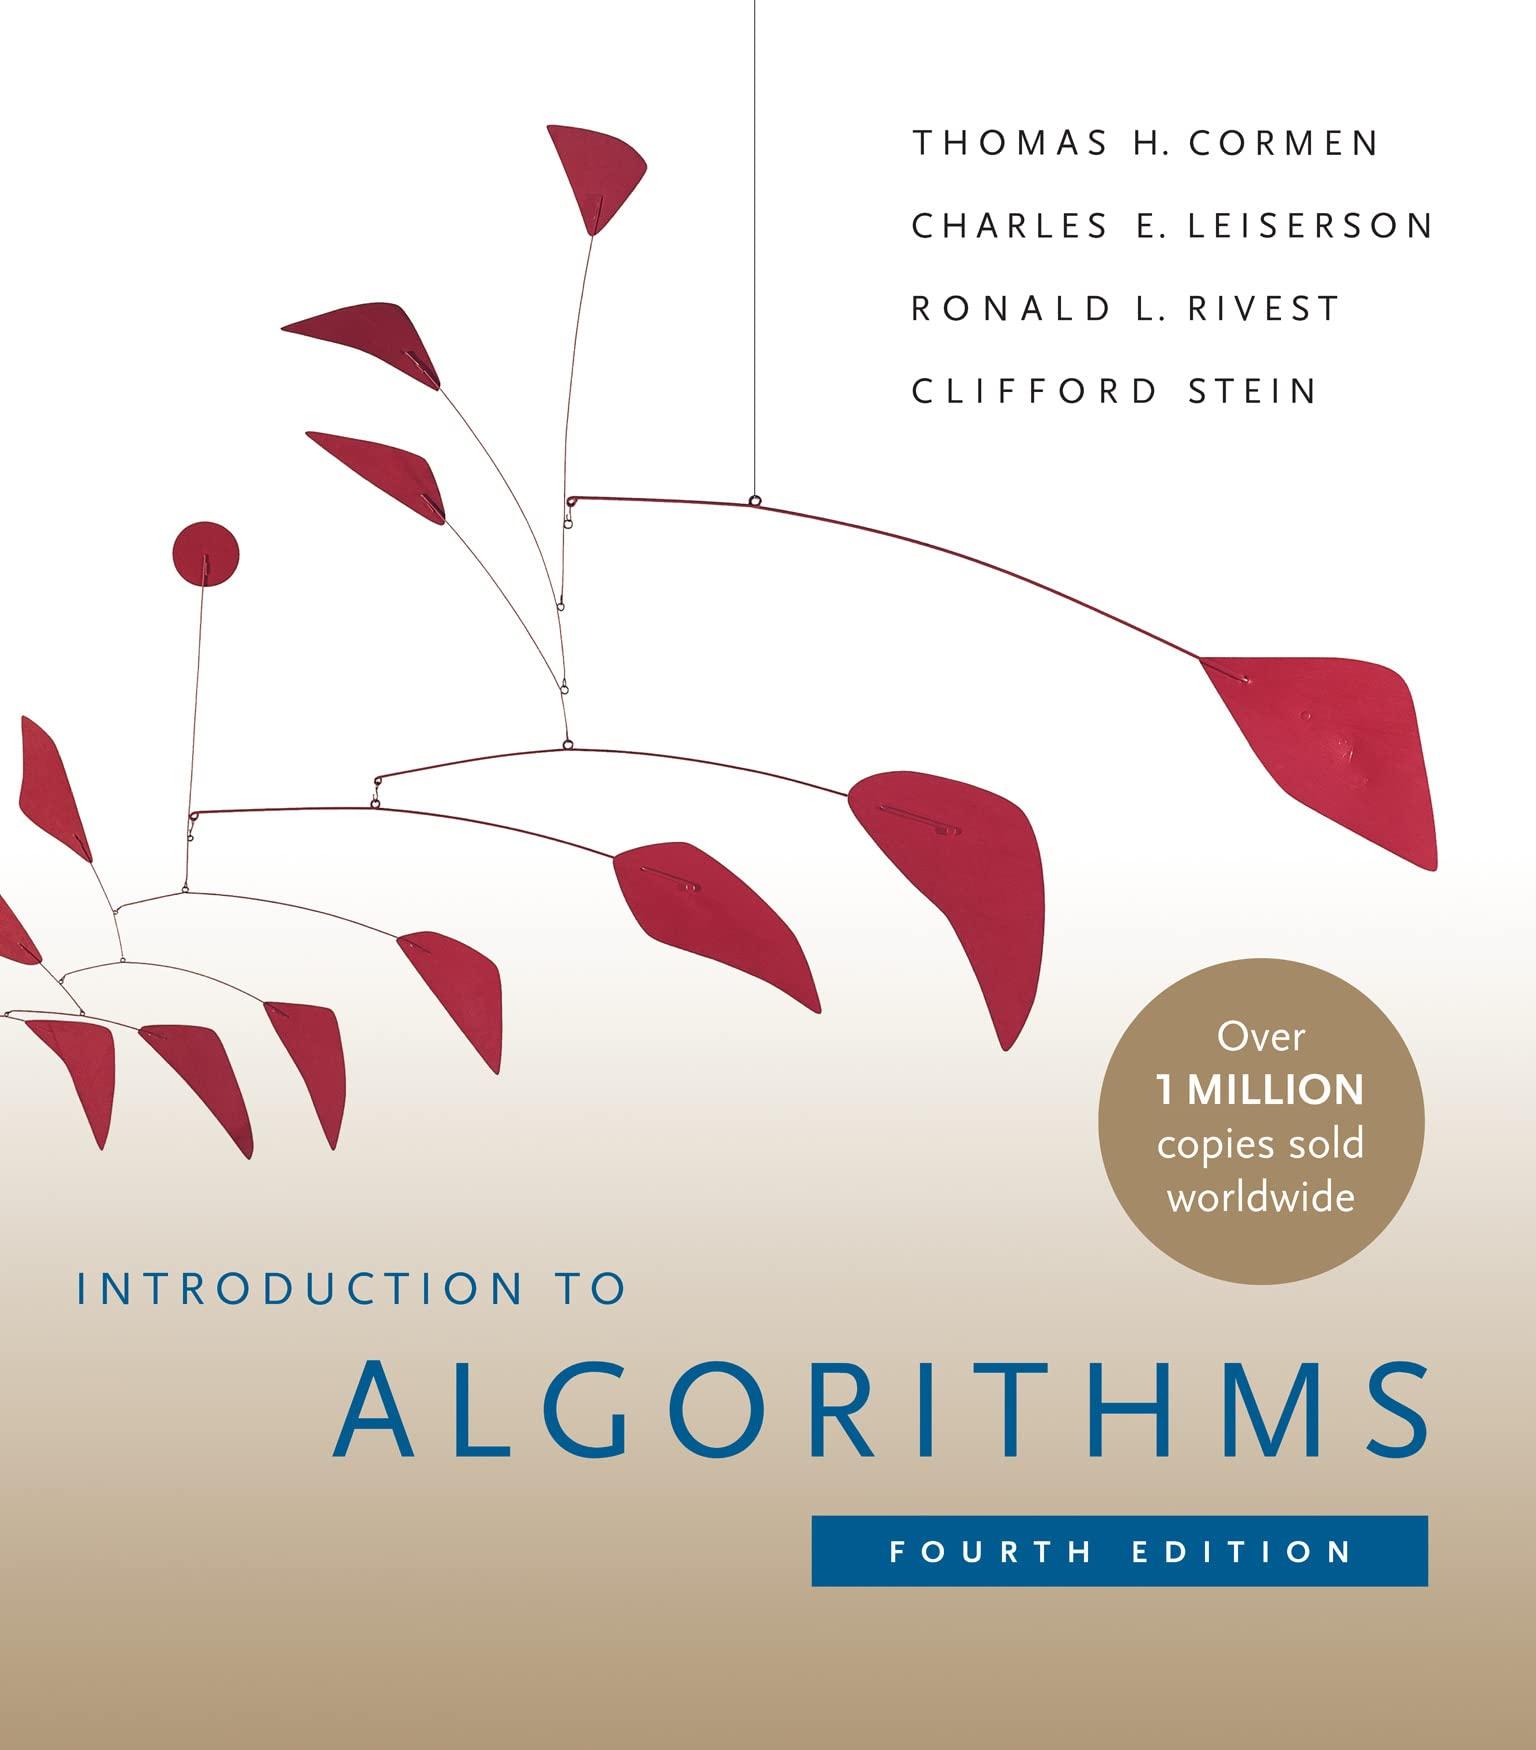 introduction to algorithms 4th edition thomas h. cormen, charles e. leiserson, ronald l. rivest, clifford